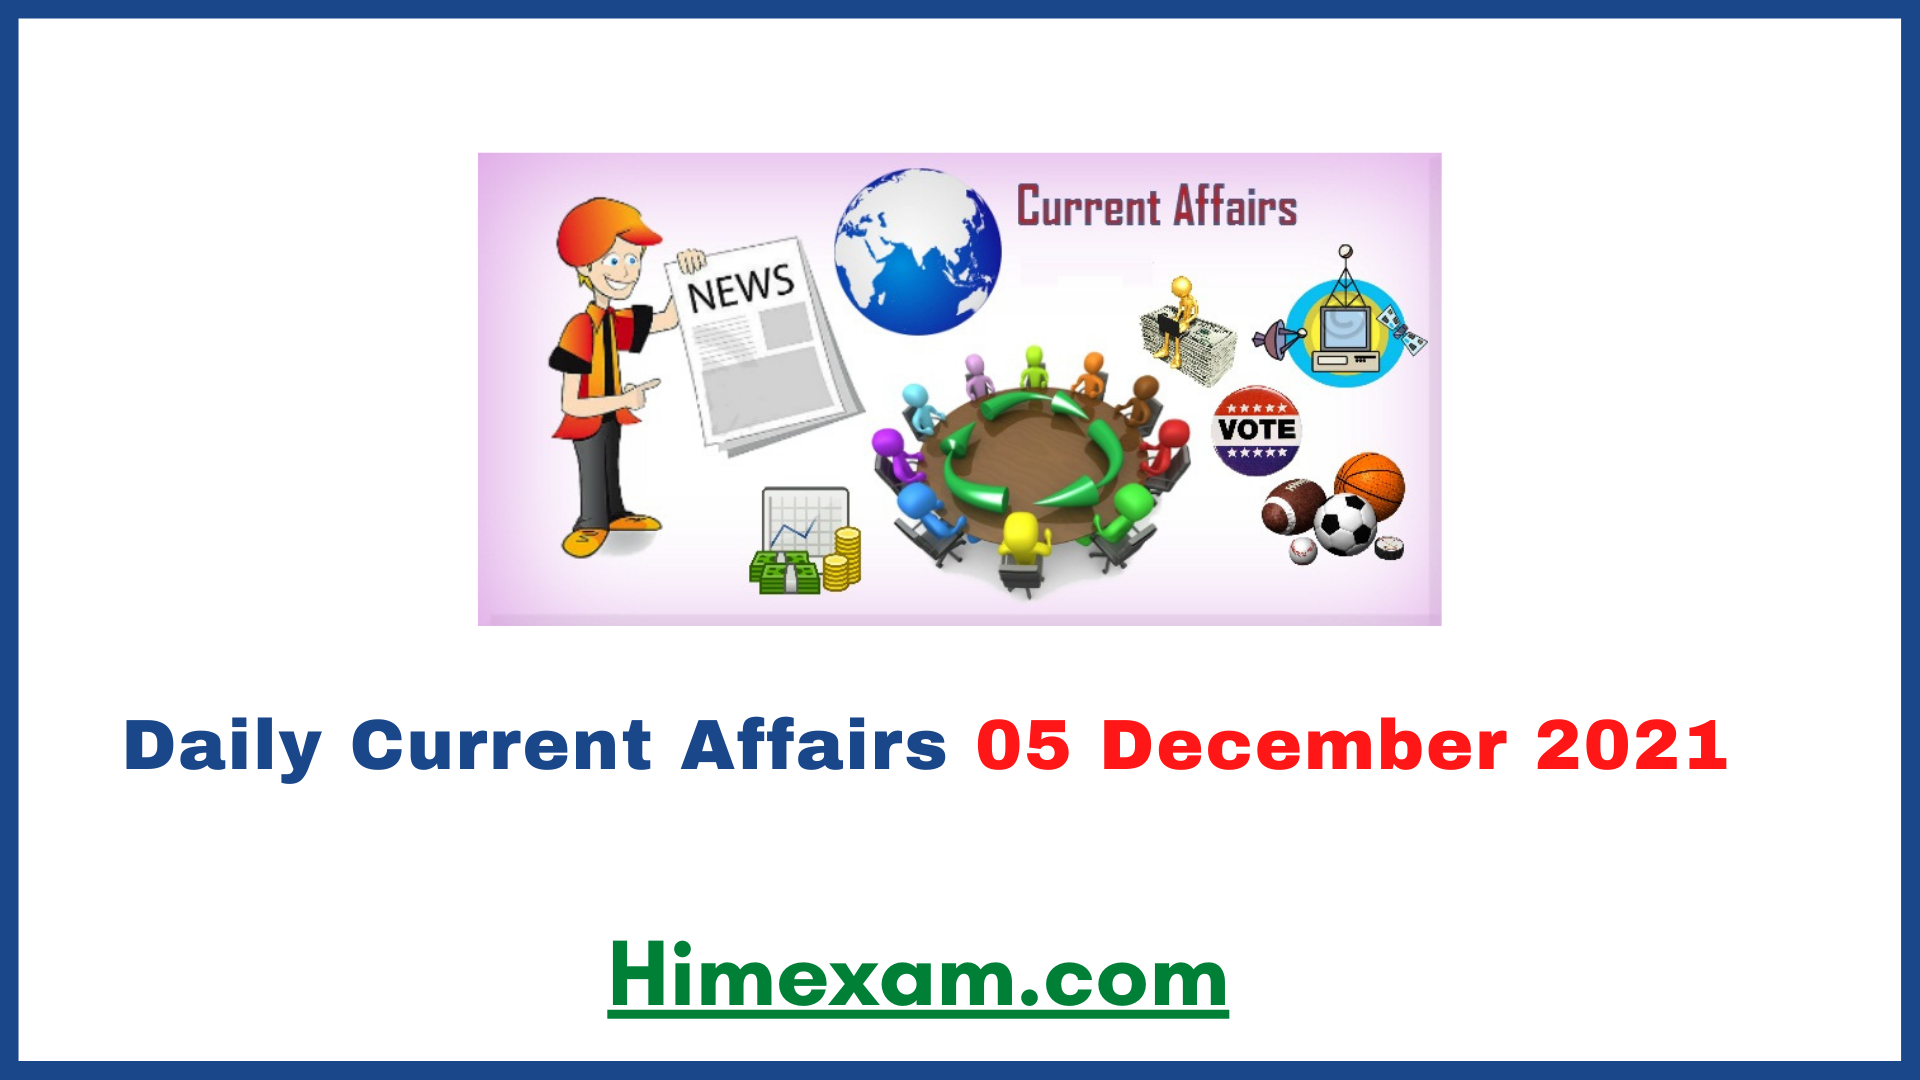 Daily Current Affairs 05 December 2021